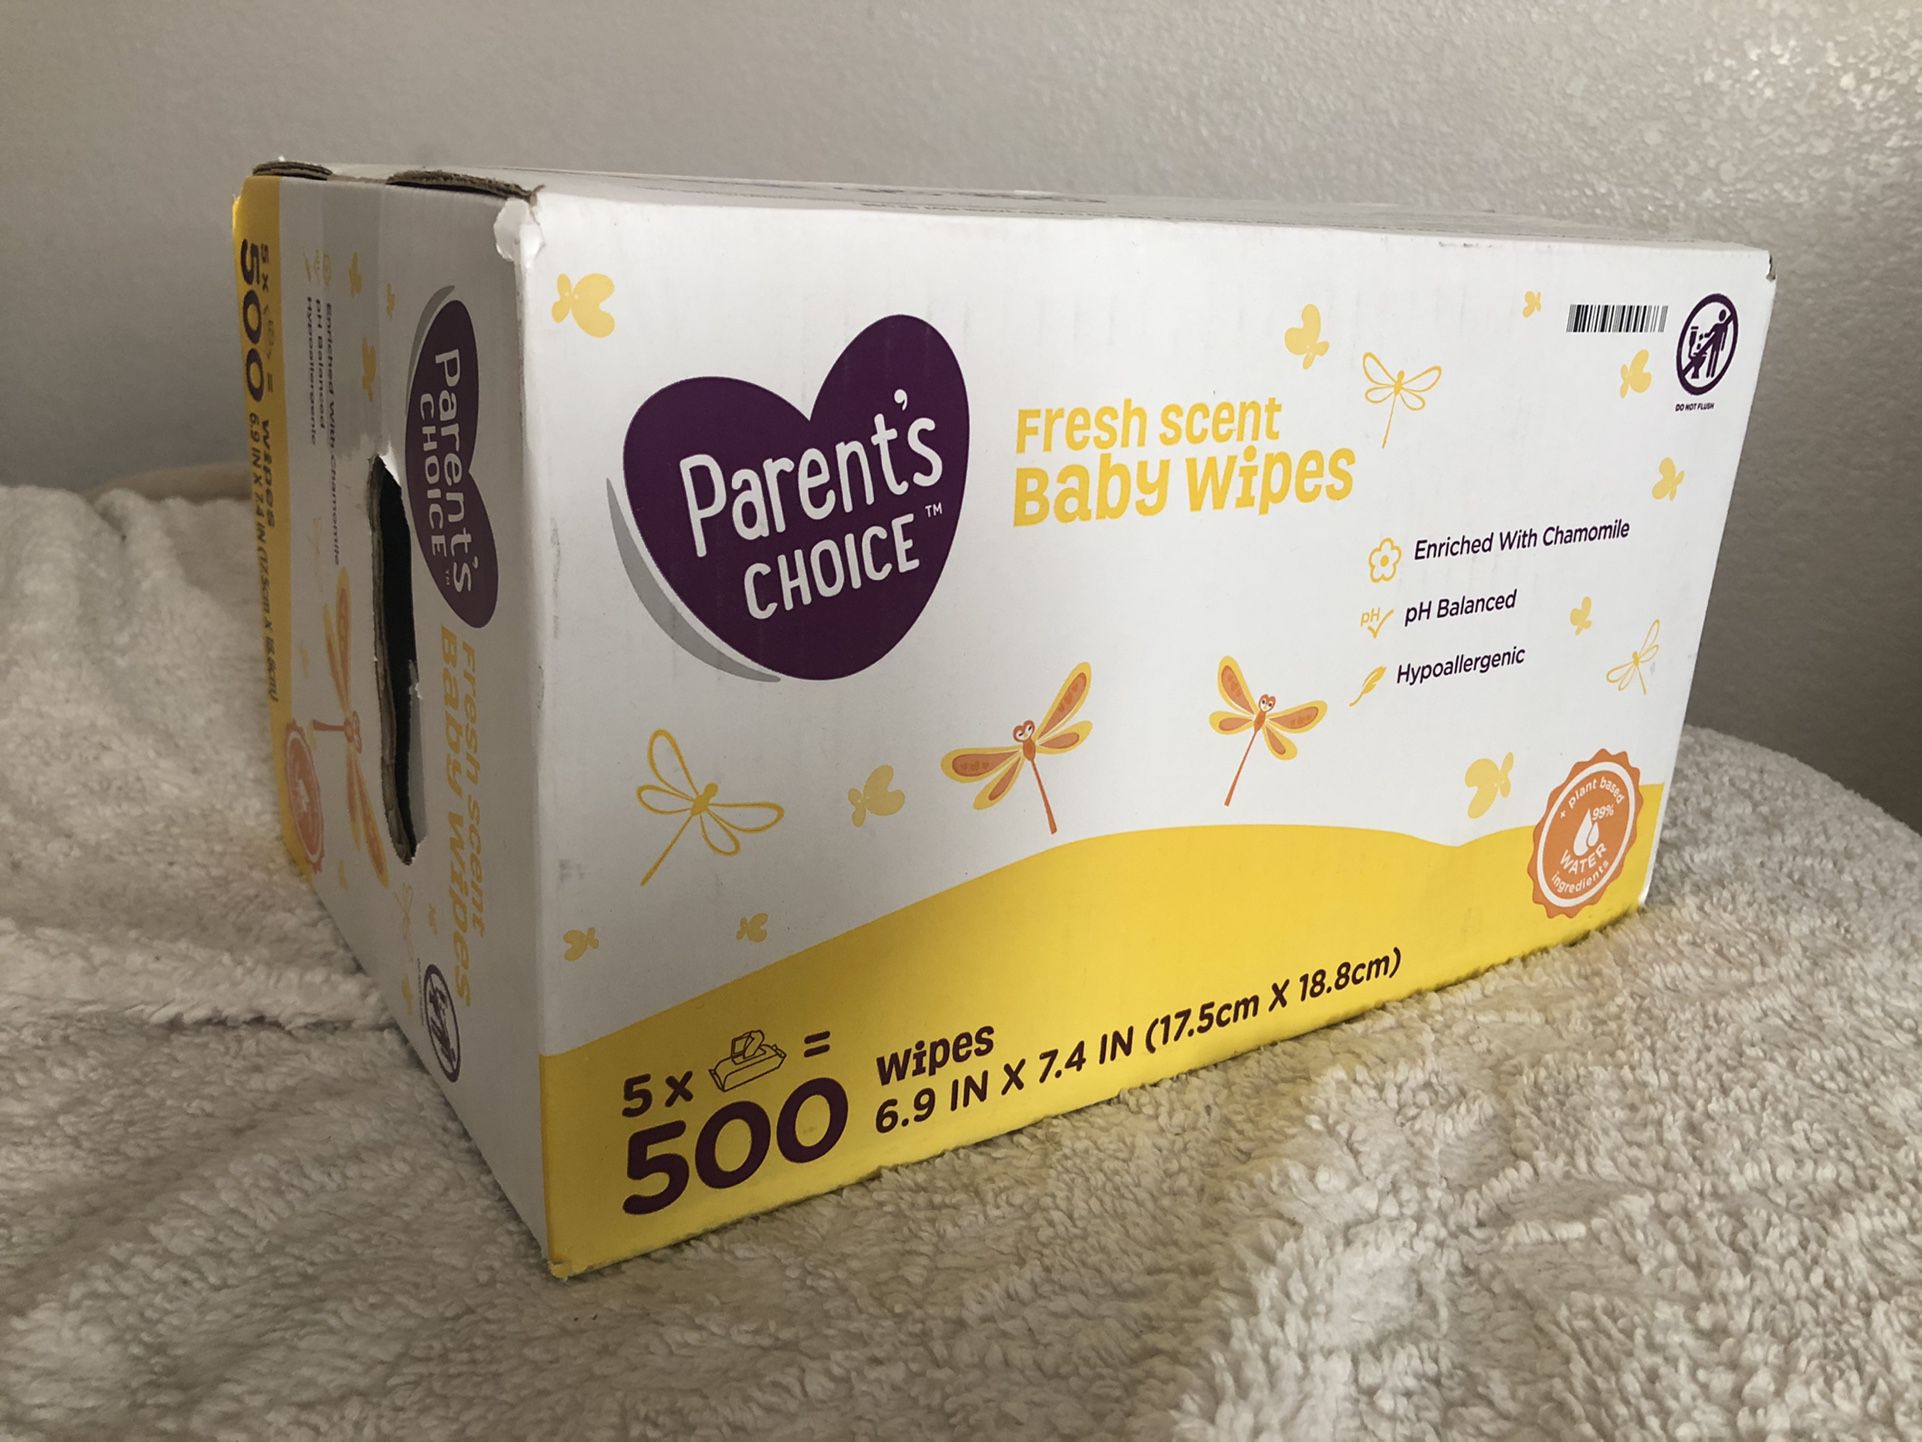 Parents Choice Fresh Scent Baby Wipes